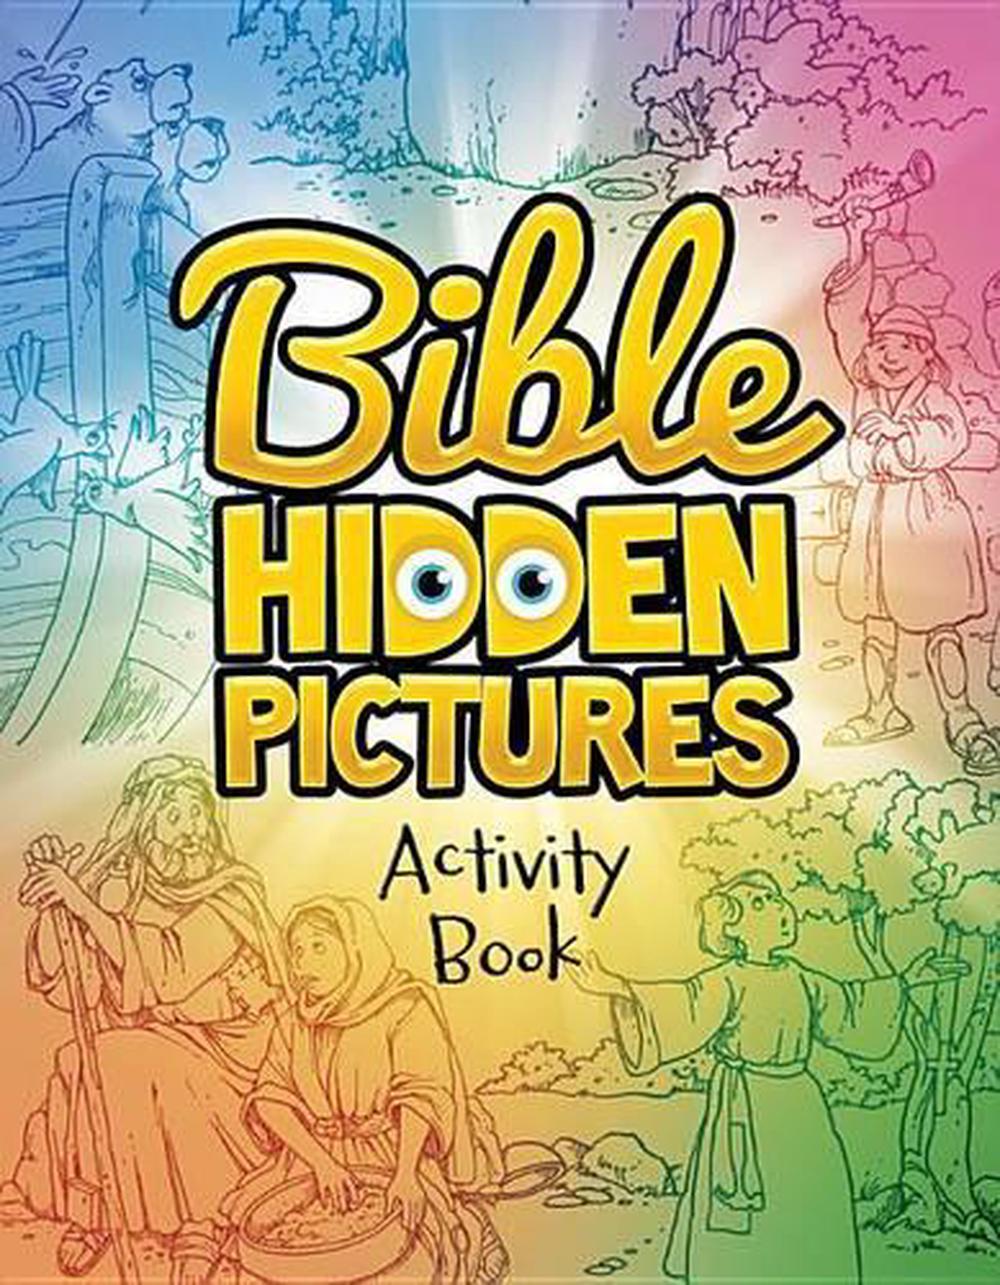 bible-story-hidden-pictures-printable-printable-word-searches